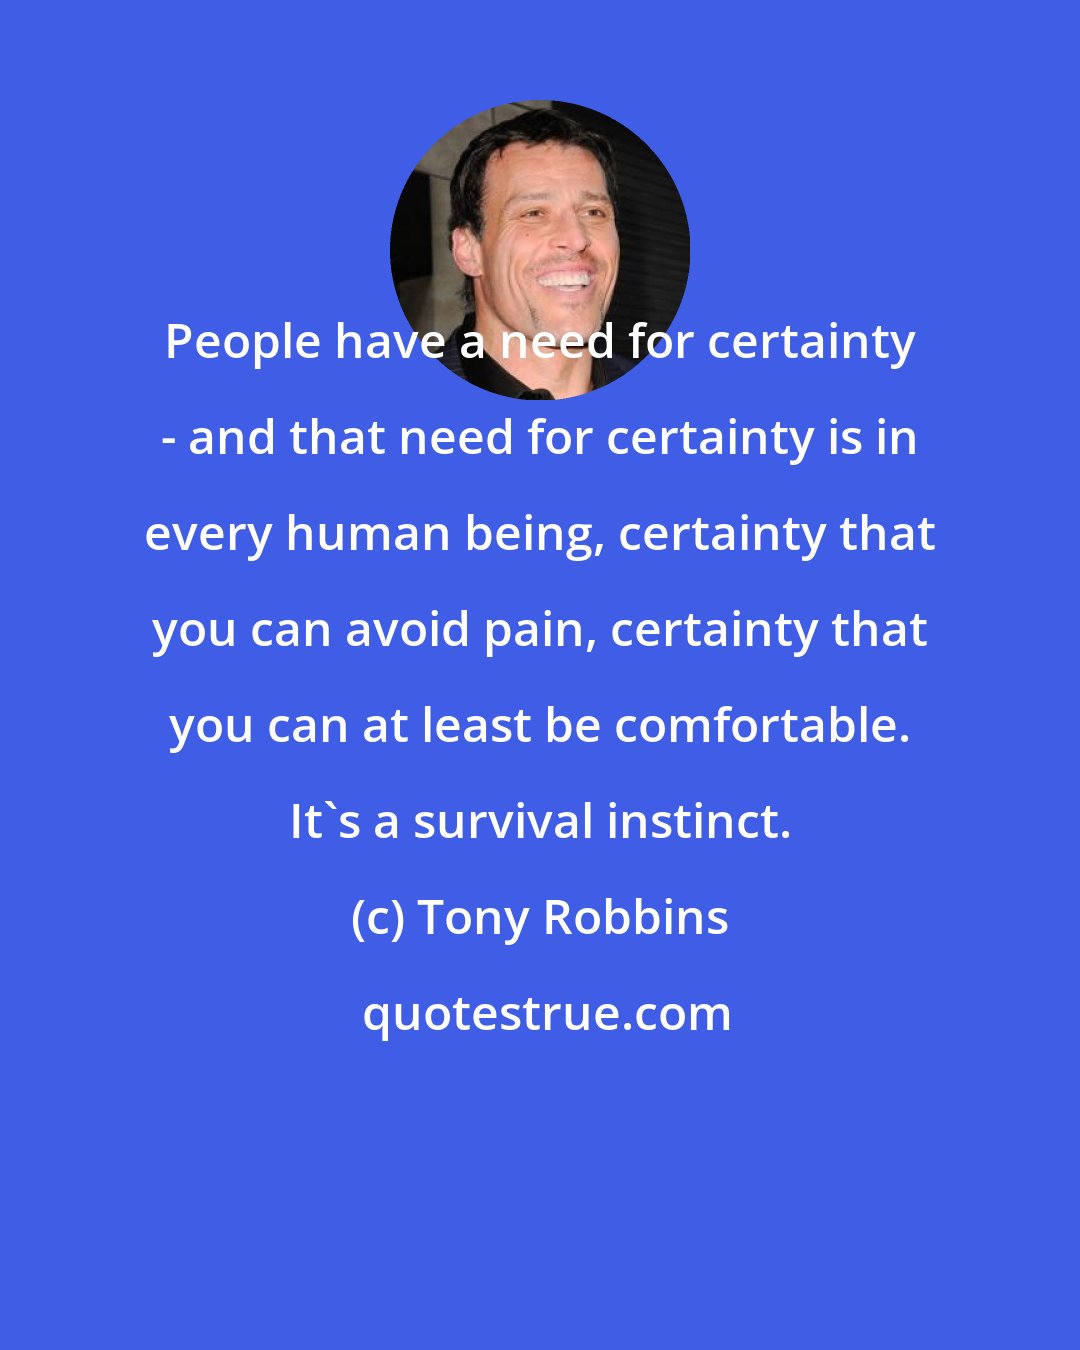 Tony Robbins: People have a need for certainty - and that need for certainty is in every human being, certainty that you can avoid pain, certainty that you can at least be comfortable. It's a survival instinct.